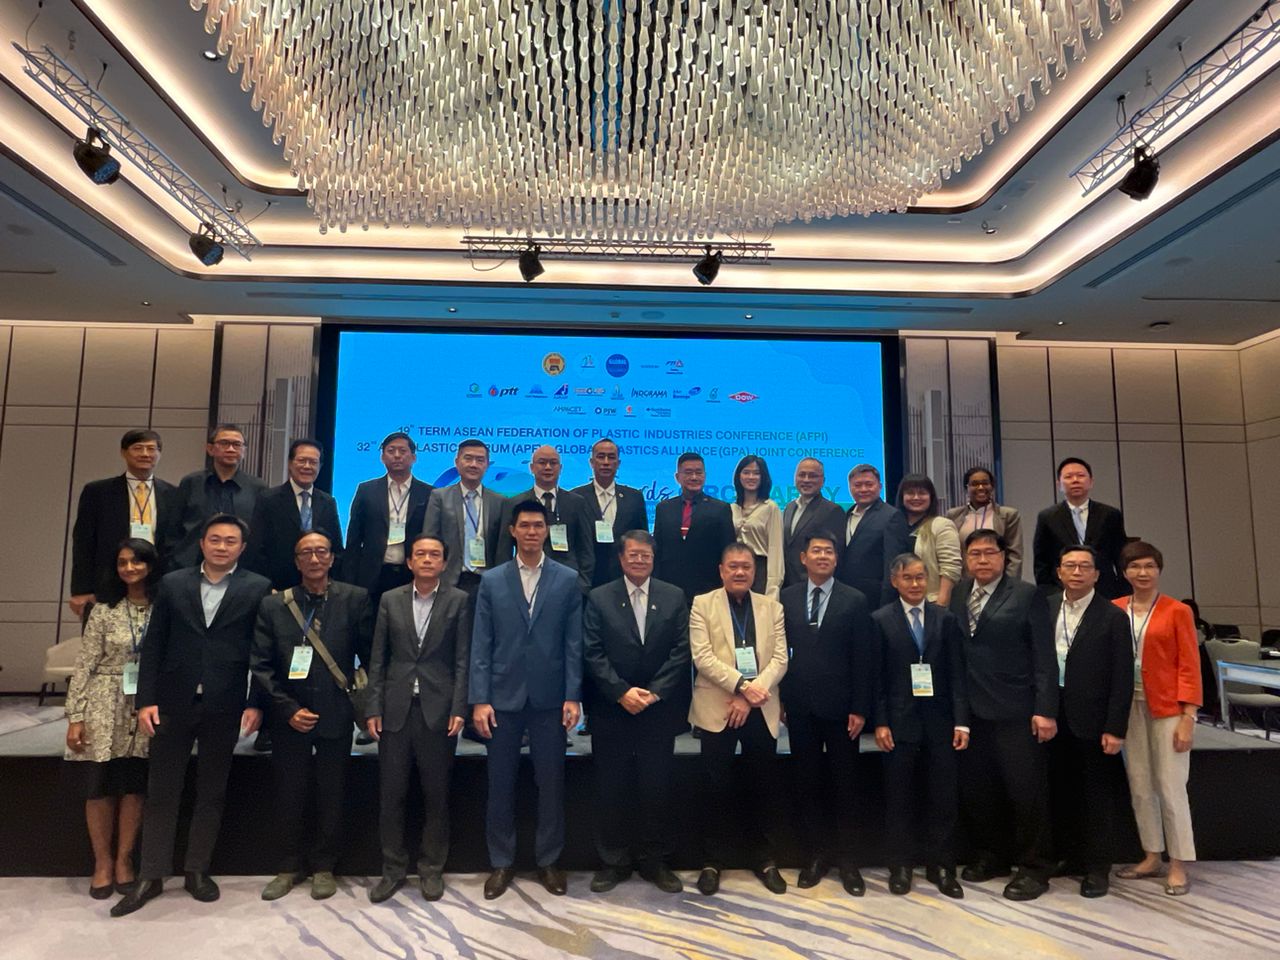 19th Term ASEAN Federation of Plastic Industries, 32nd Asia Plastics Forum, Global Plastics Alliance Joint Conference from 13 - 15 December 2022 in Carlton Hotel, Bangkok, Thailand